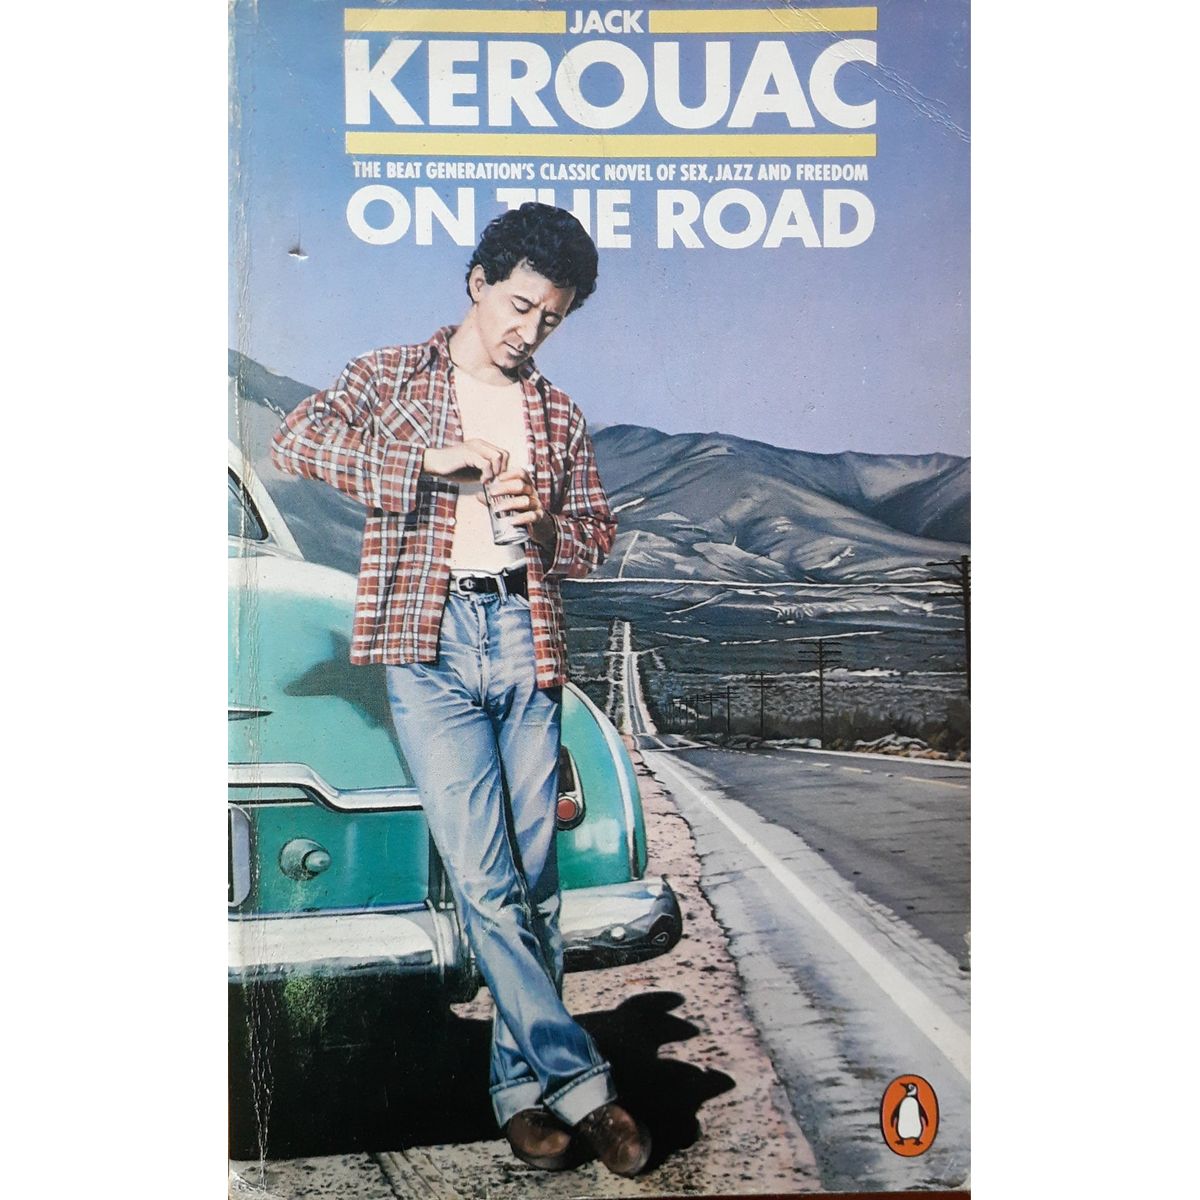 ISBN: 9780140031928 / 0140031928 - On the Road by Jack Kerouac [1986]